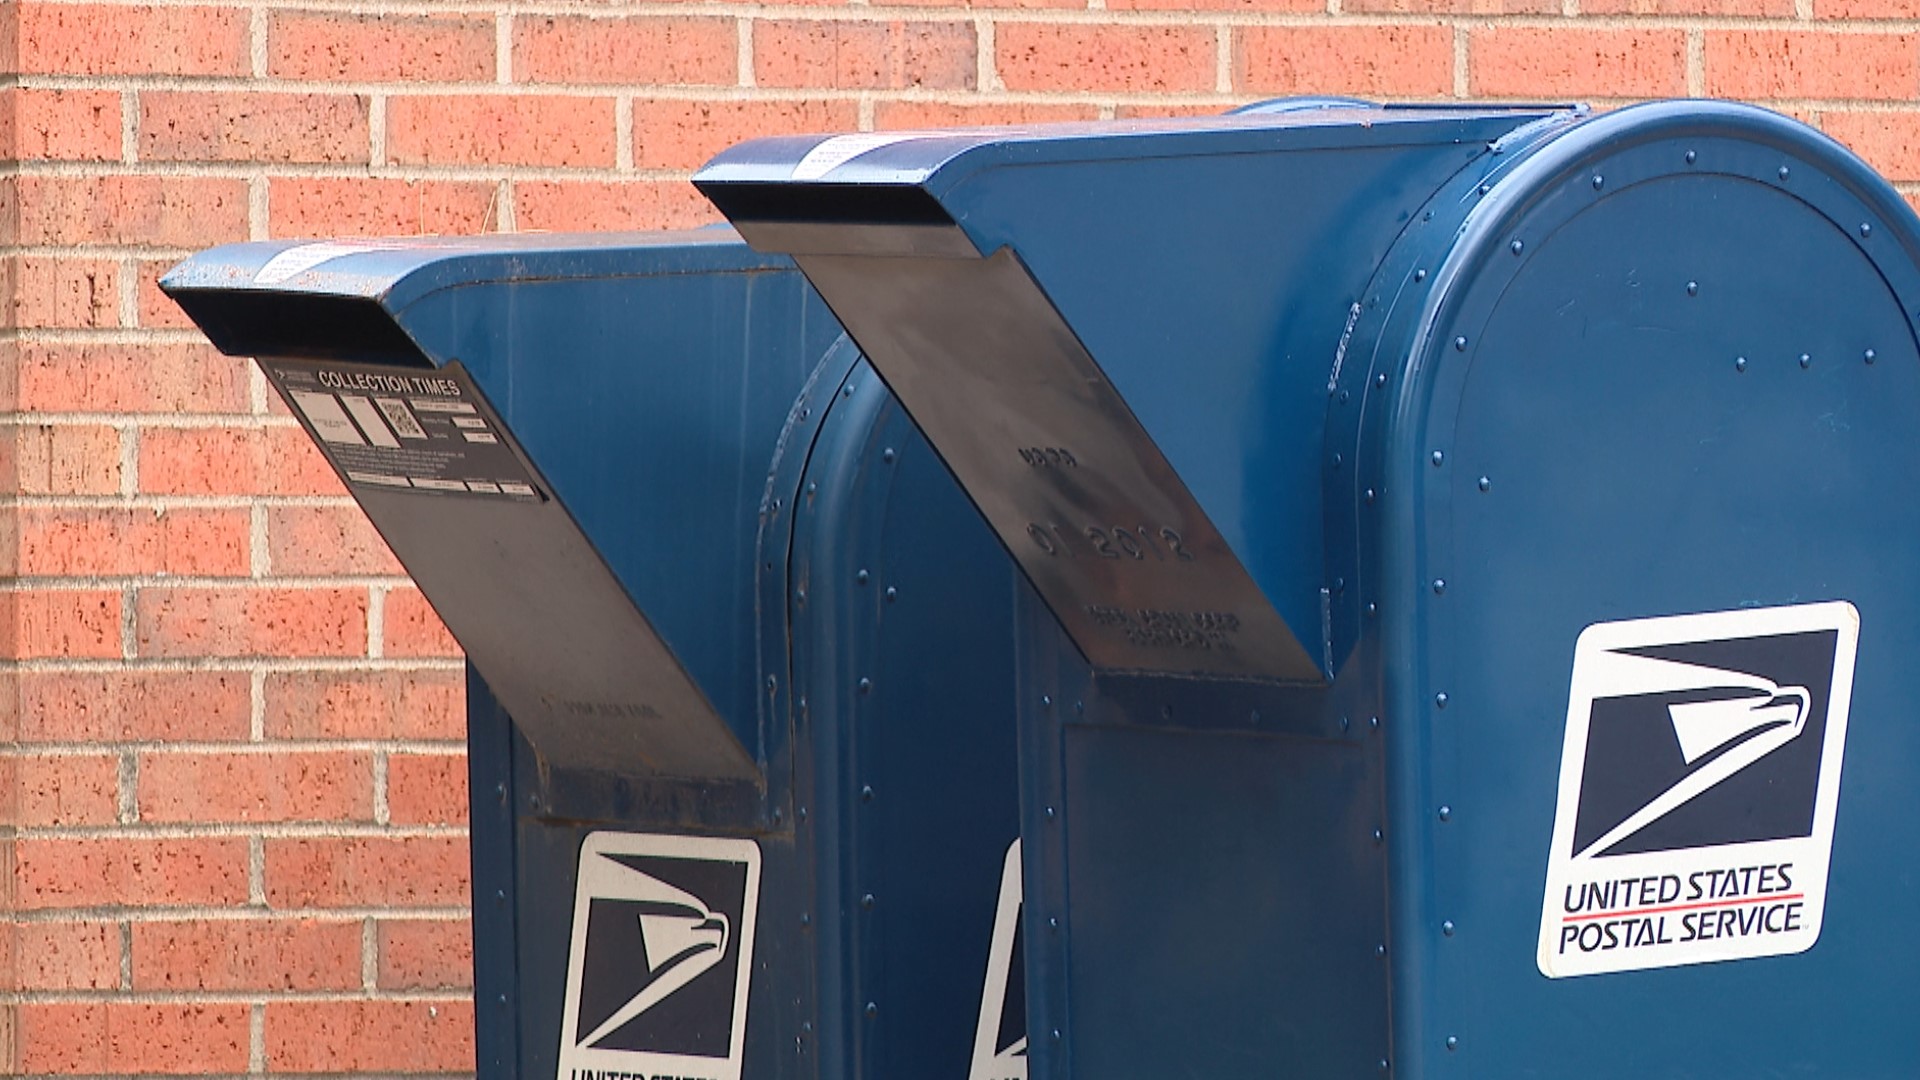 According to an audit by the Inspector General for the USPS in 2021, mail theft complaints increased by 161% from March 2020 to February 2021.